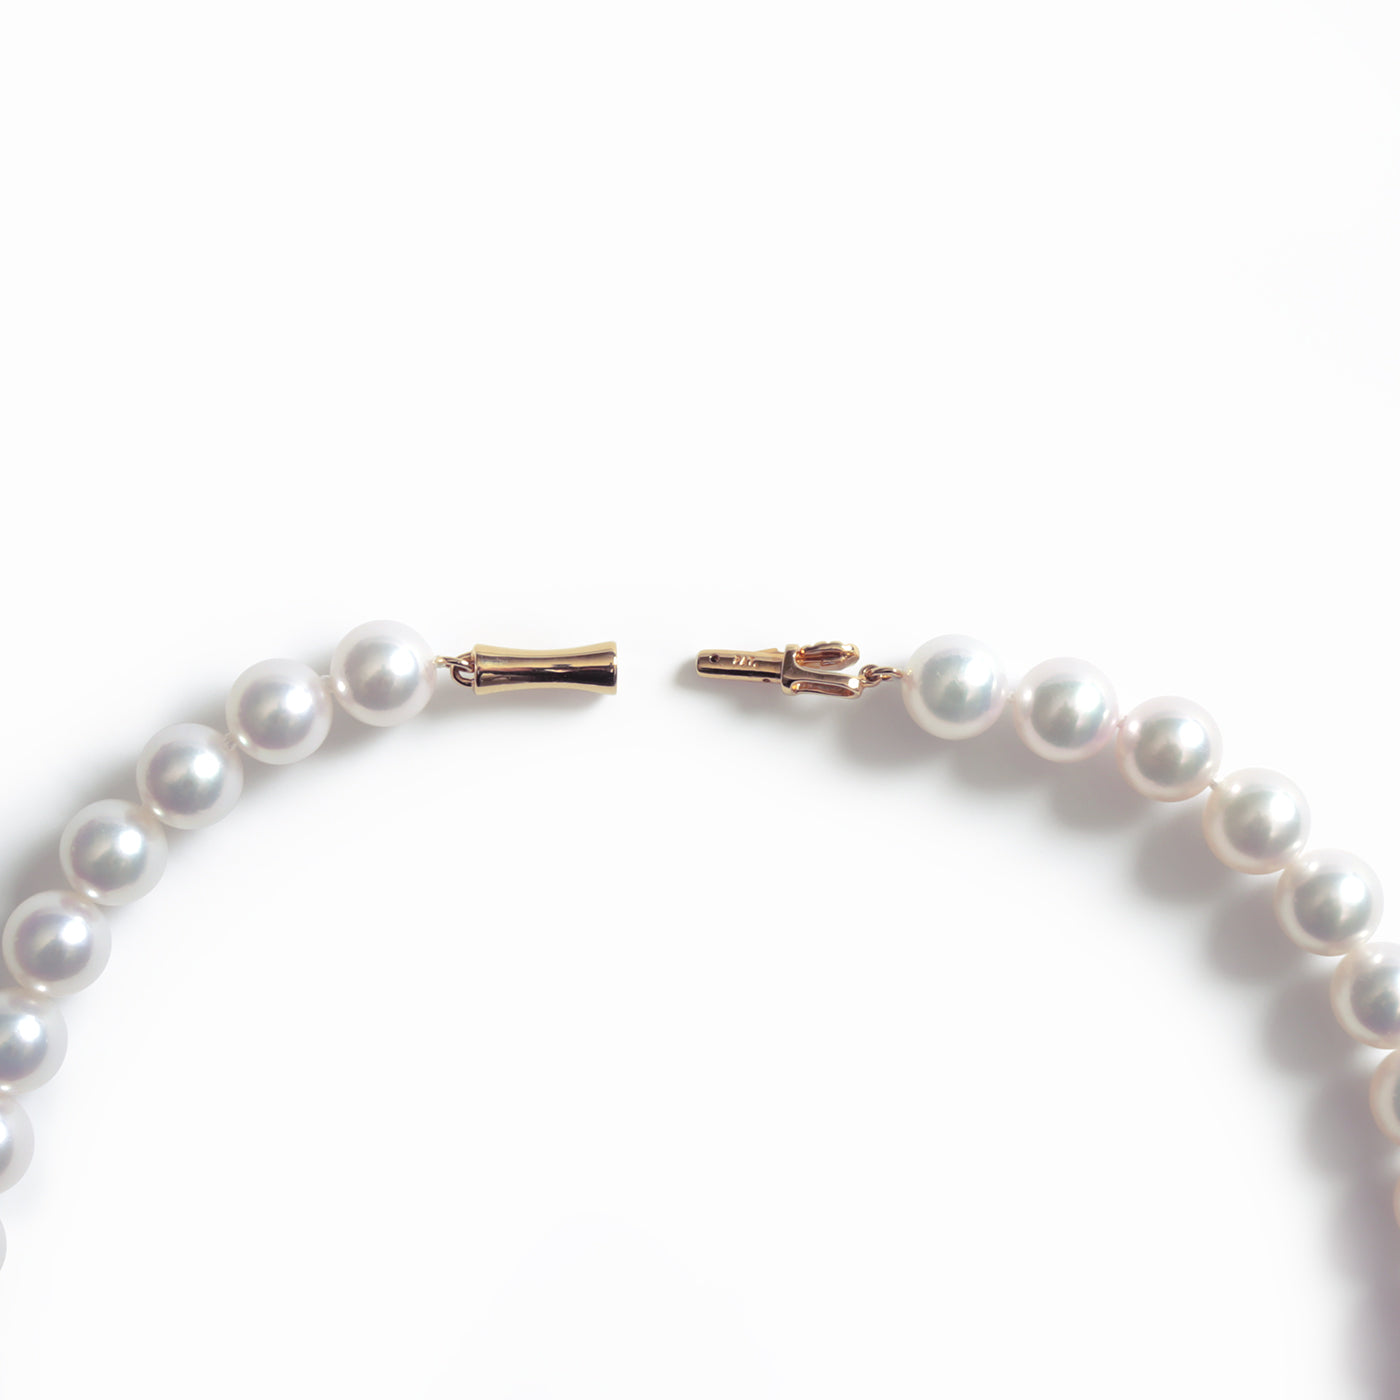 Akoya Pearl Necklace - 8.0-8.5mm "花珠"アコヤパール